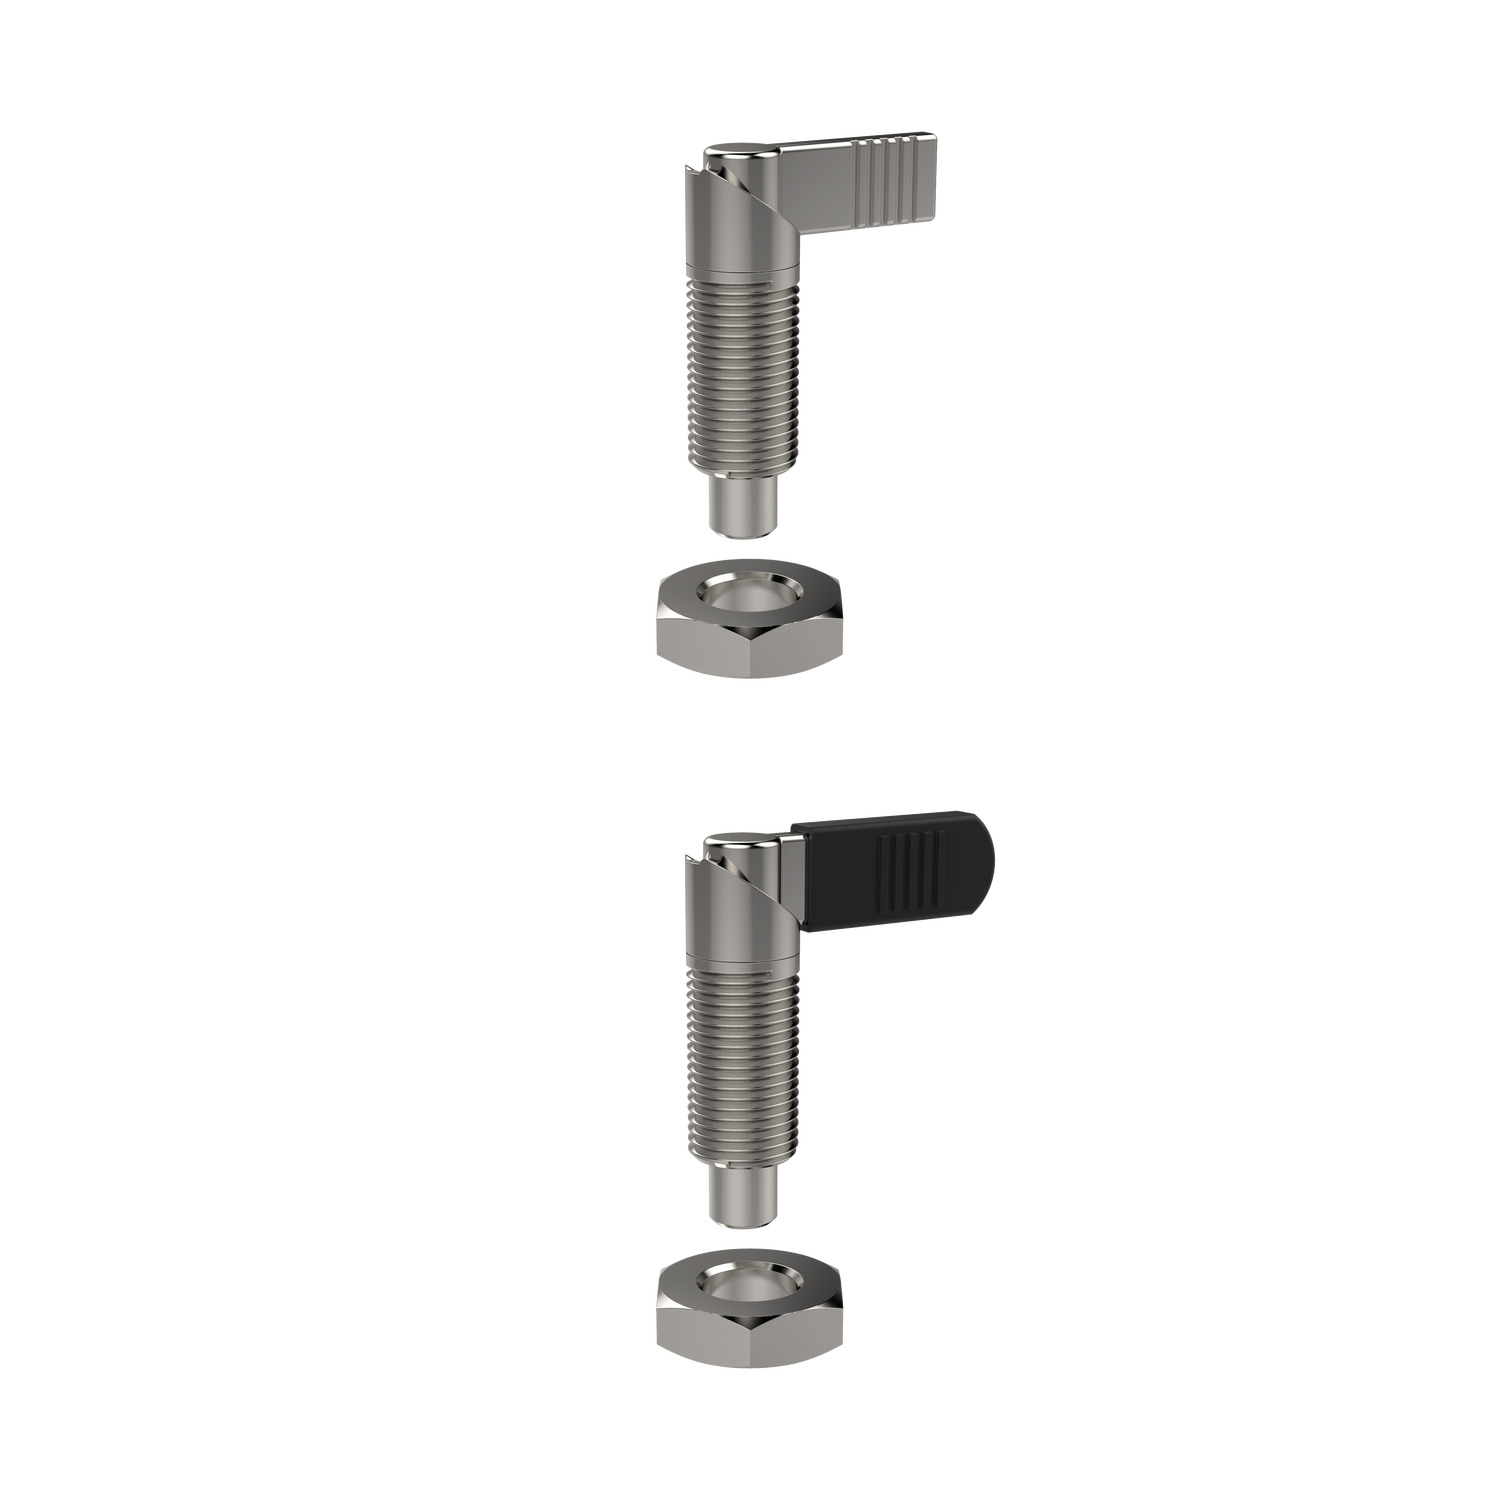 Index Plungers - Lever Grip Stainless steel locking lever grip index plunger with plastic handle. Actuate via 180° turn to retract pin and secure in notch to lock the pin whilst retracted.